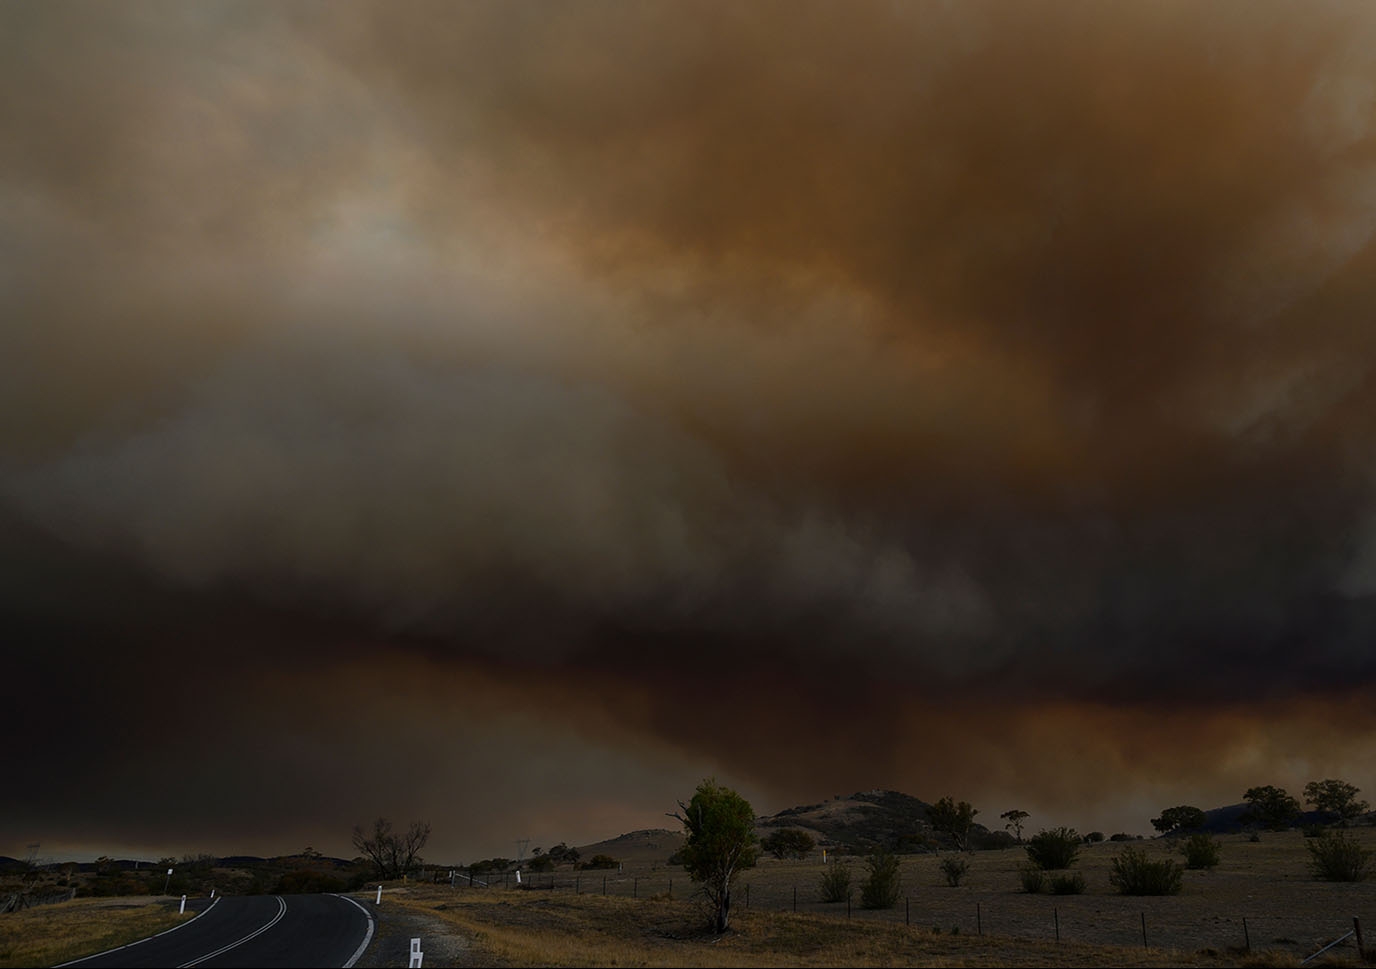 Scientists from UNSW used an online survey to capture the impact of  the 2019/2020 bushfires on people's mental health. Image: Shutterstock/ Jimmy Walsh